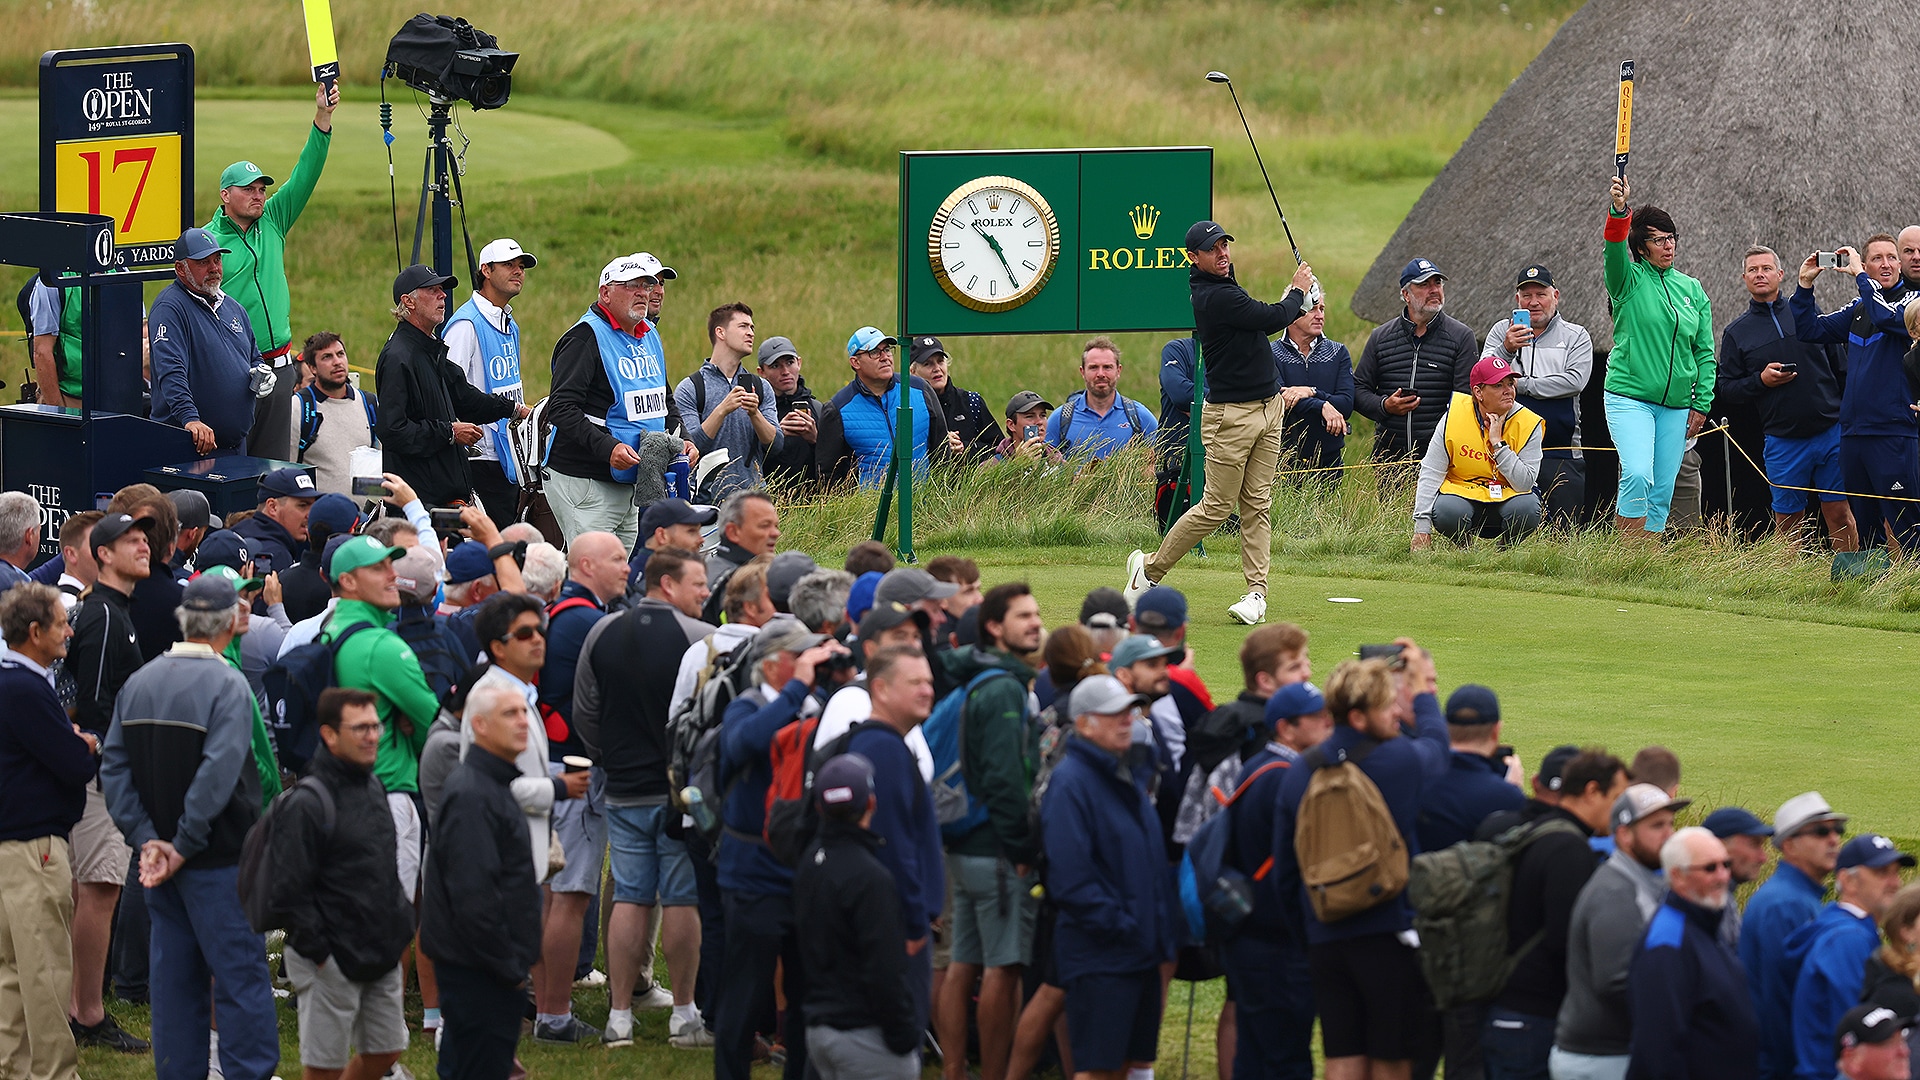 2021 British Open: R&A confident no repeat of Scottish Open incident with Rory McIlroy and fan